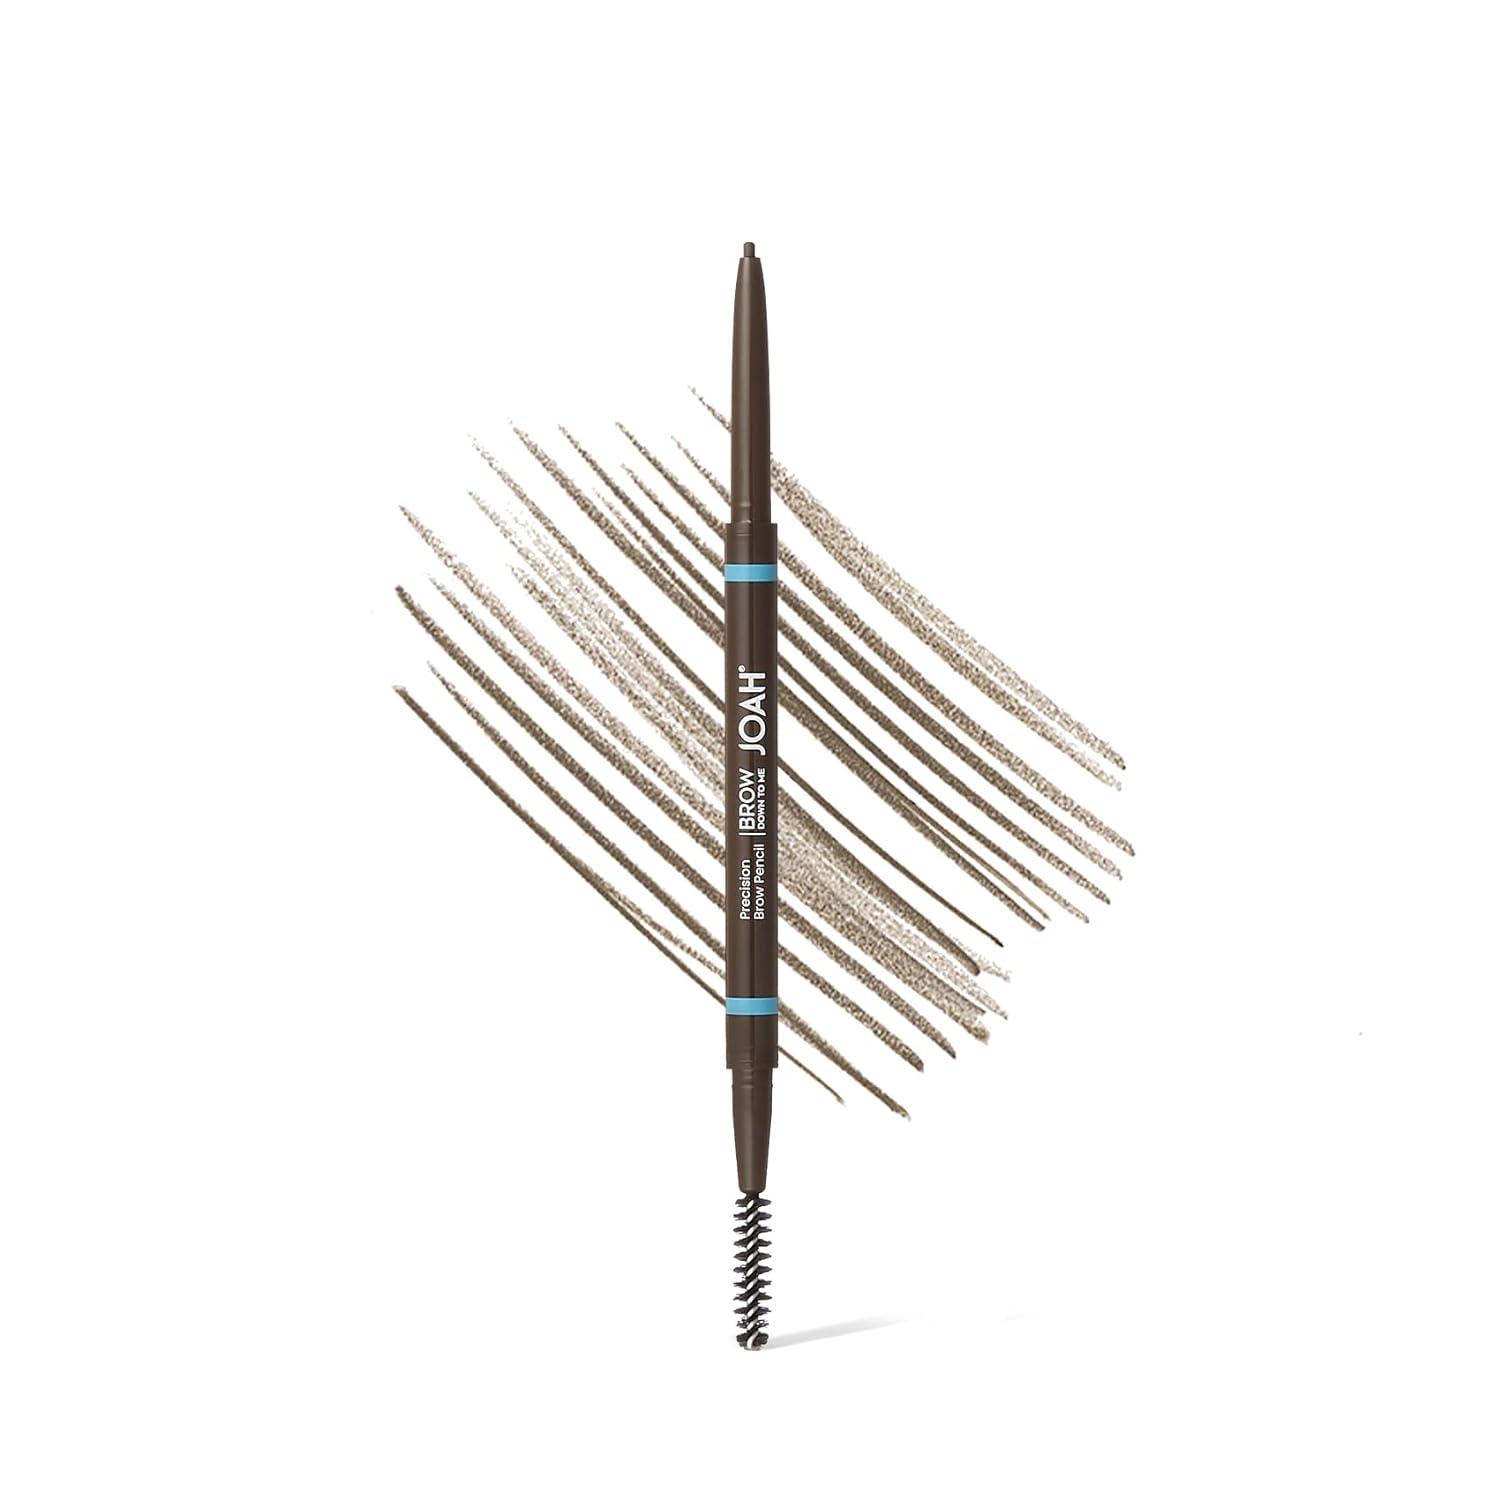 JOAH Brow Down To Me Precision Brow Pencil with Built-In Spoolie, Ebony